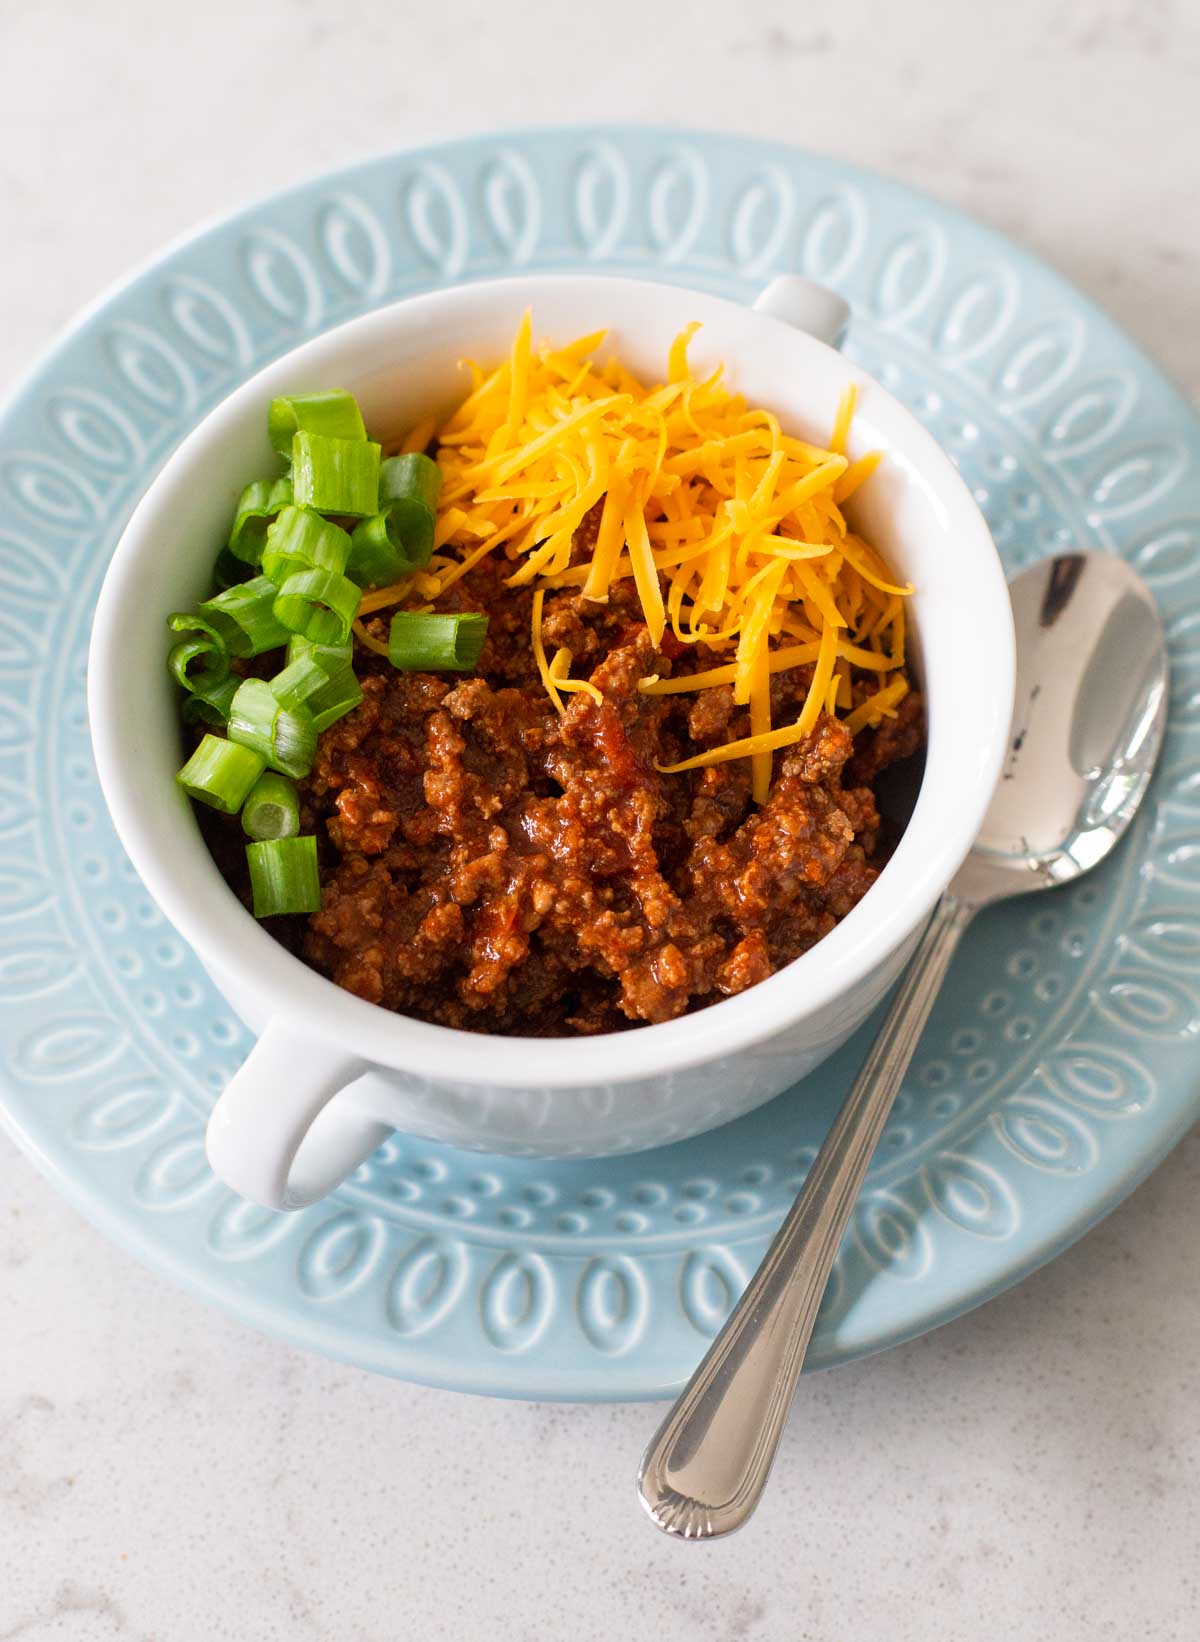 A bowl of ground beef chili is topped with cheddar cheese and green onions.